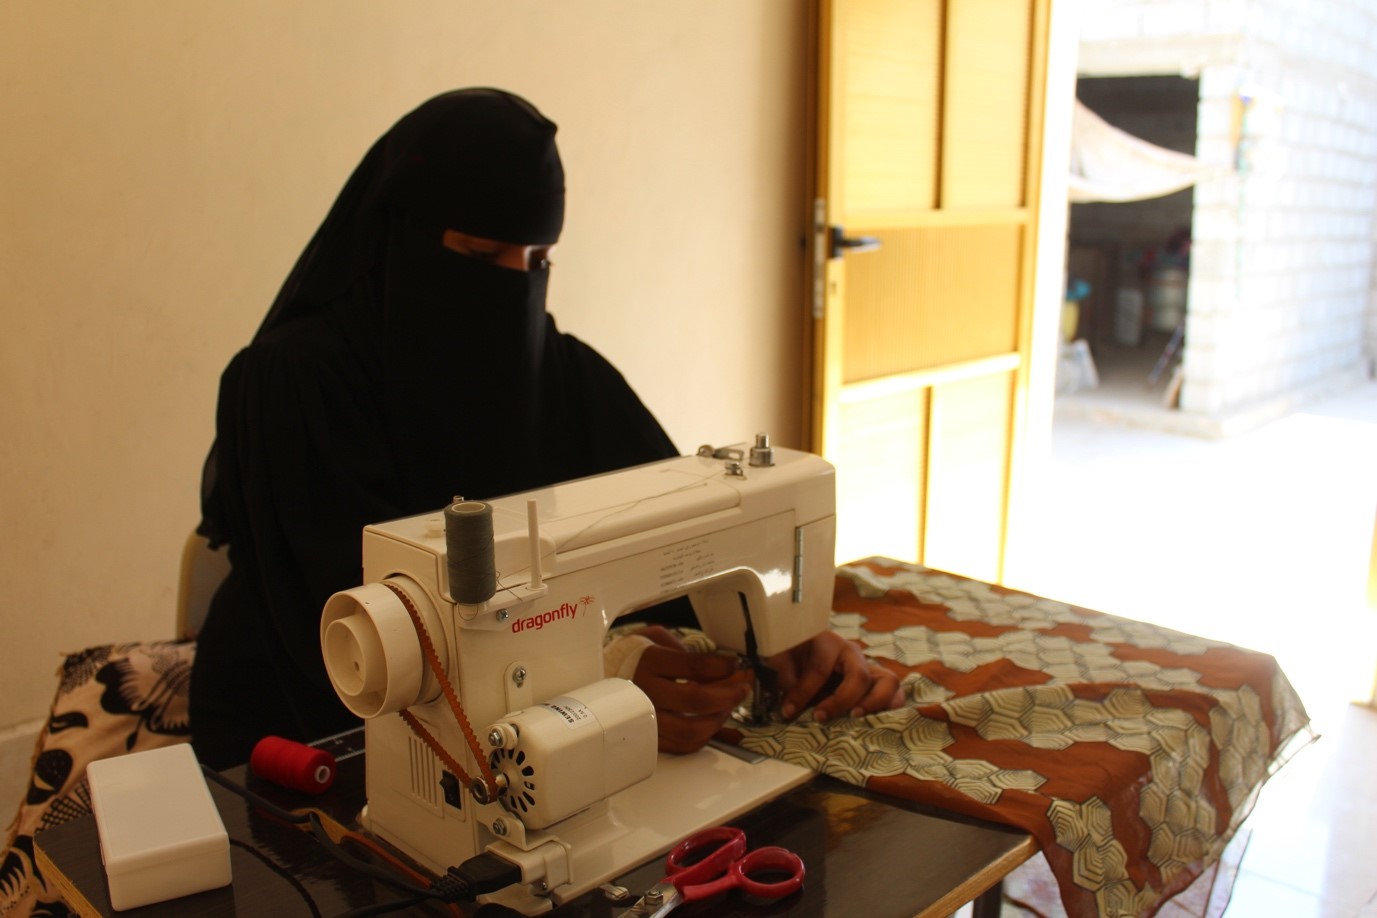 A woman wearing a black head covering using a sewing machine